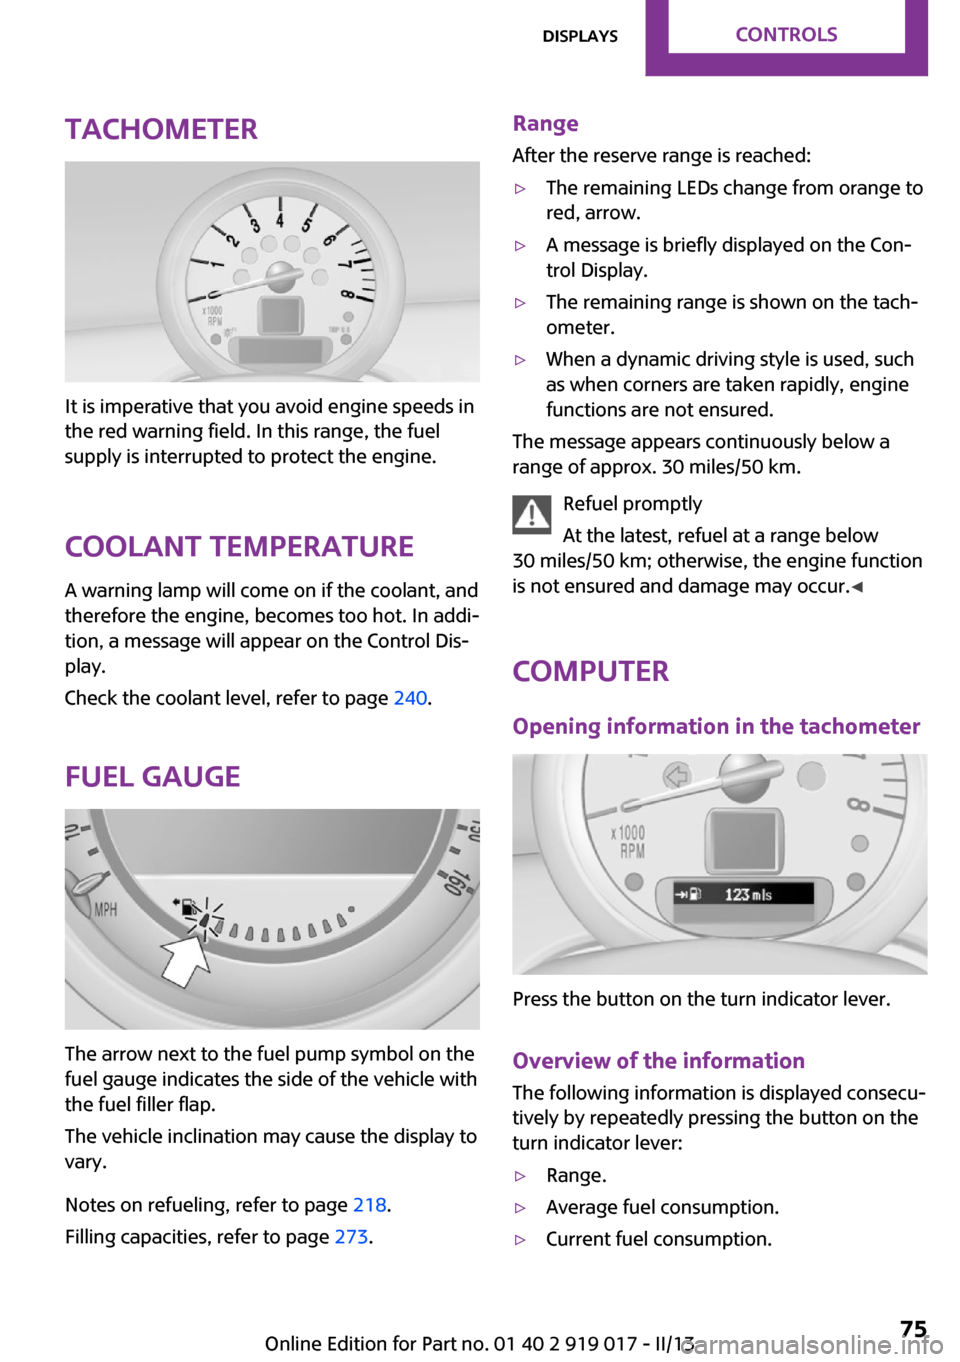 MINI Roadster 2013 Manual PDF Tachometer
It is imperative that you avoid engine speeds in
the red warning field. In this range, the fuel
supply is interrupted to protect the engine.
Coolant temperature A warning lamp will come on 